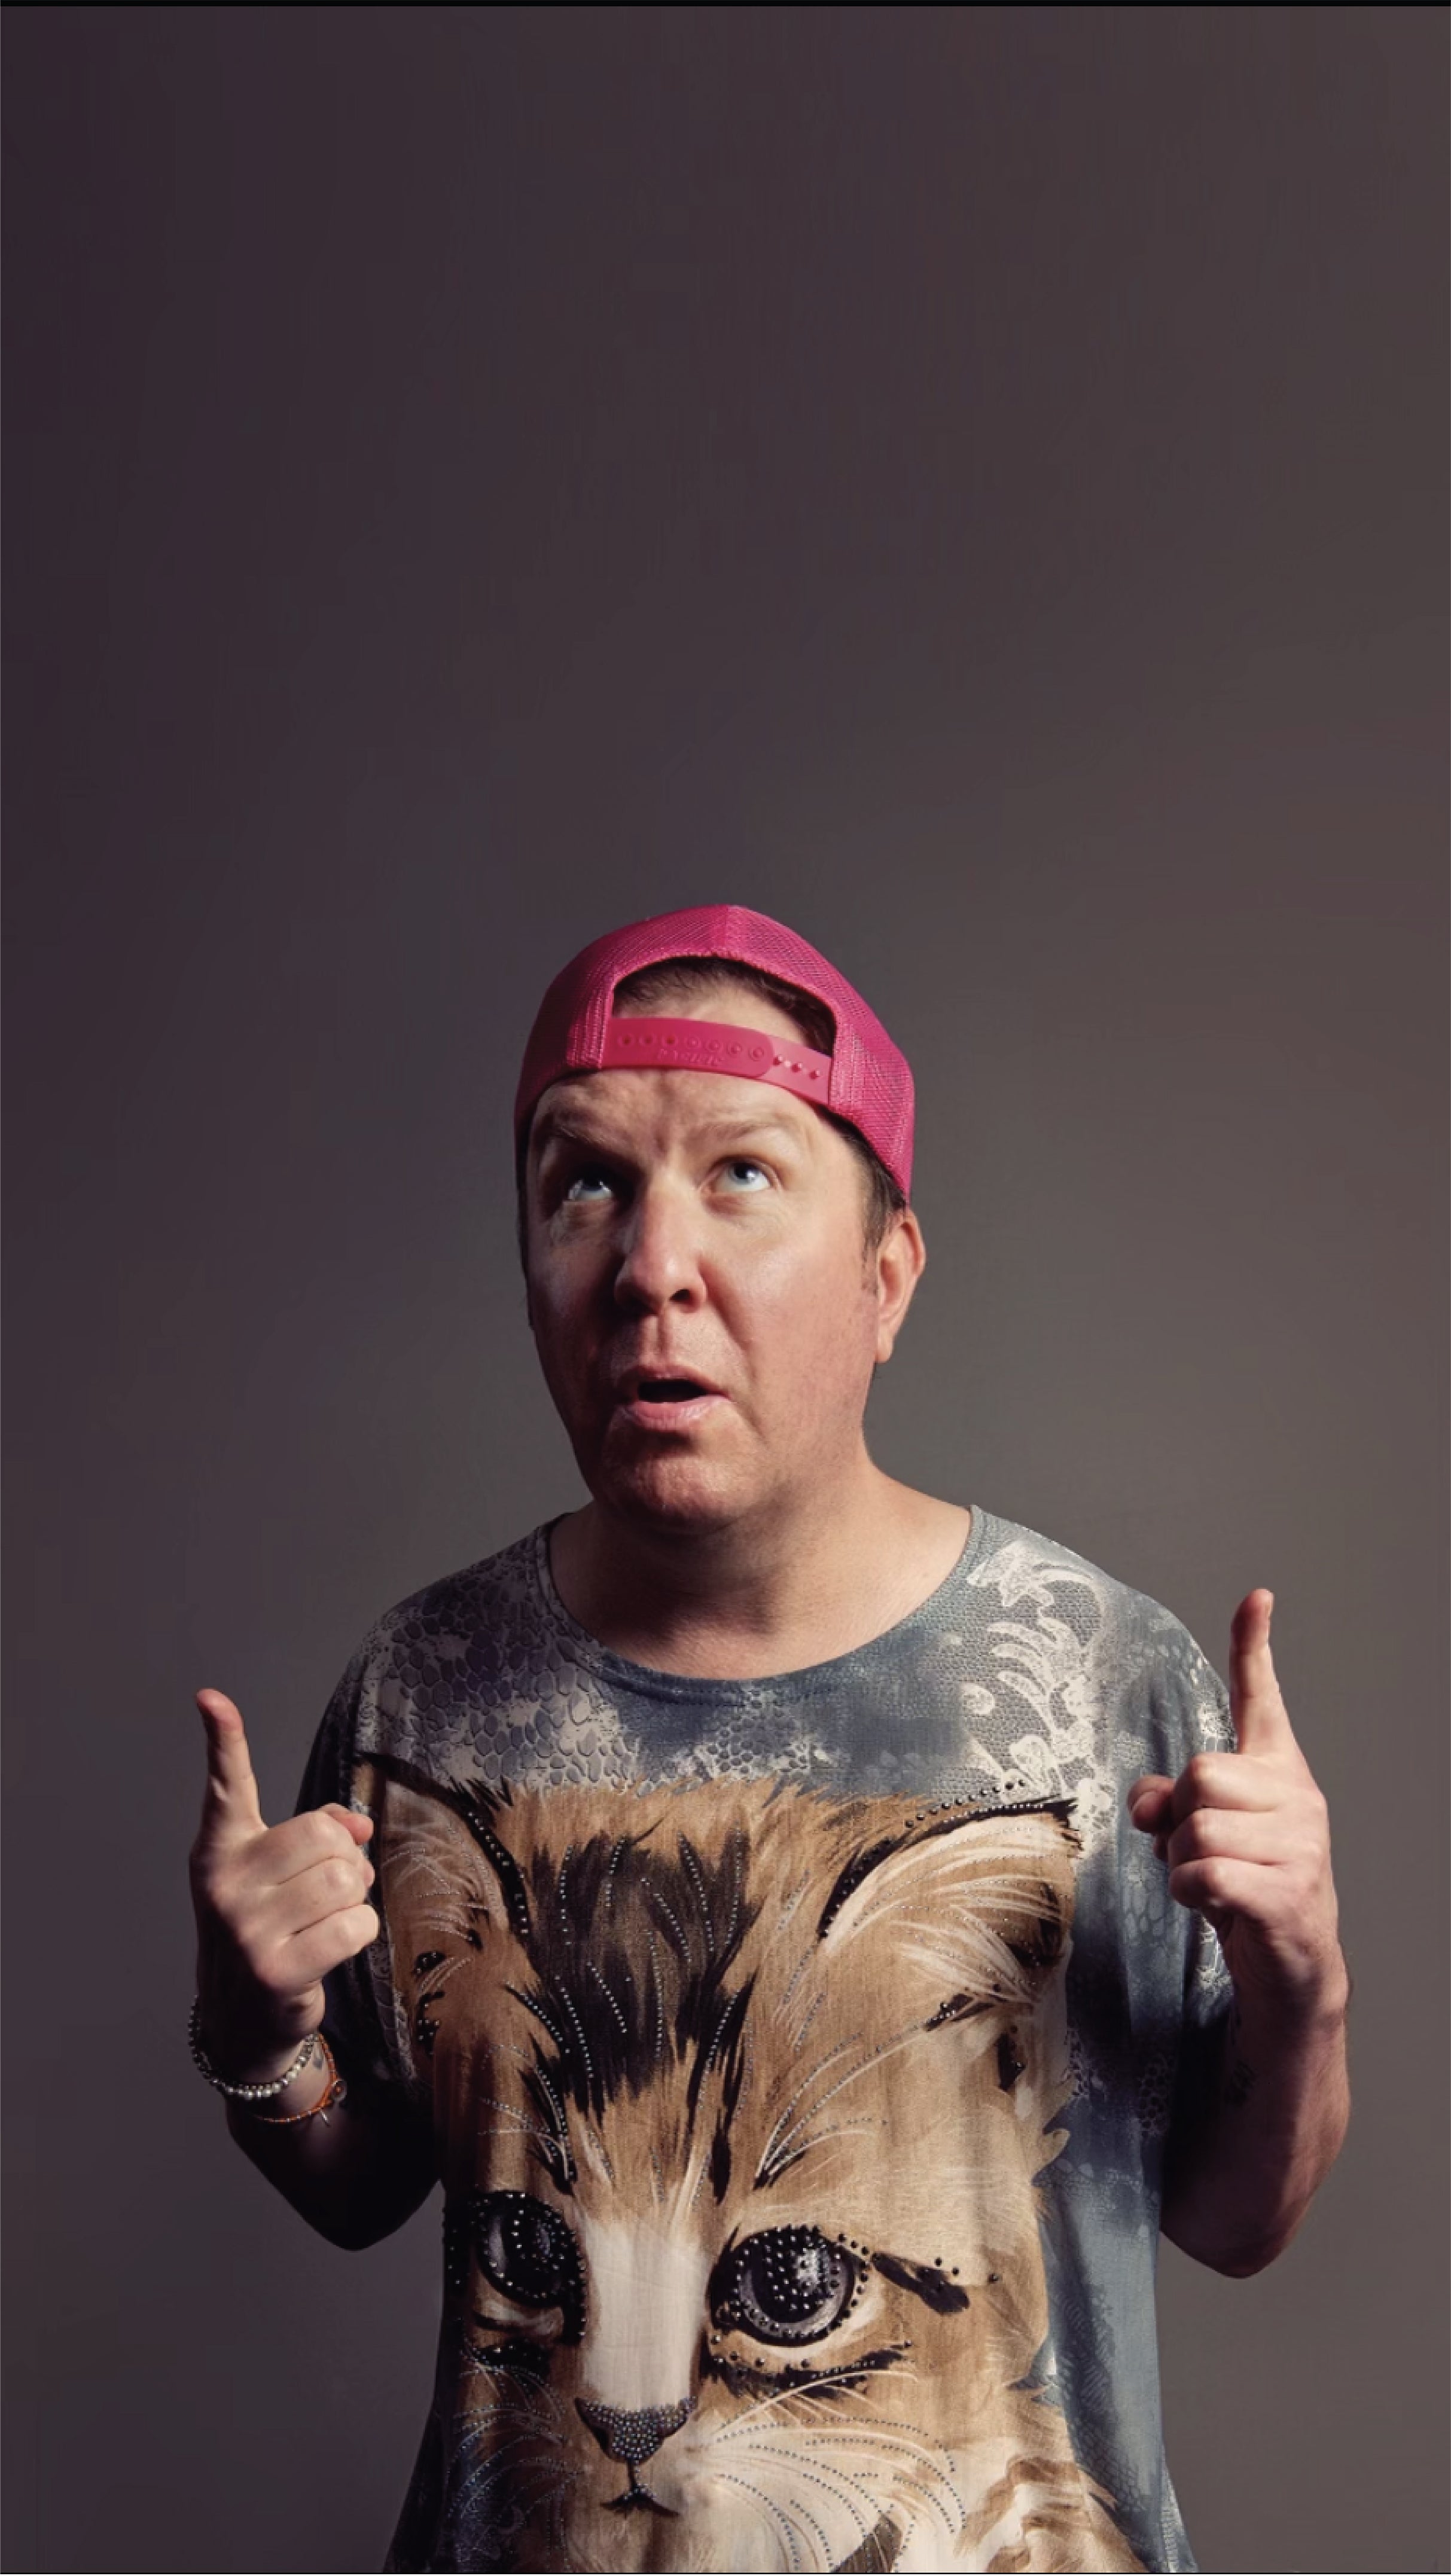 Barrel of Laughs Comedy Series: Nick Swardson in Niagara Falls promo photo for Social Club presale offer code